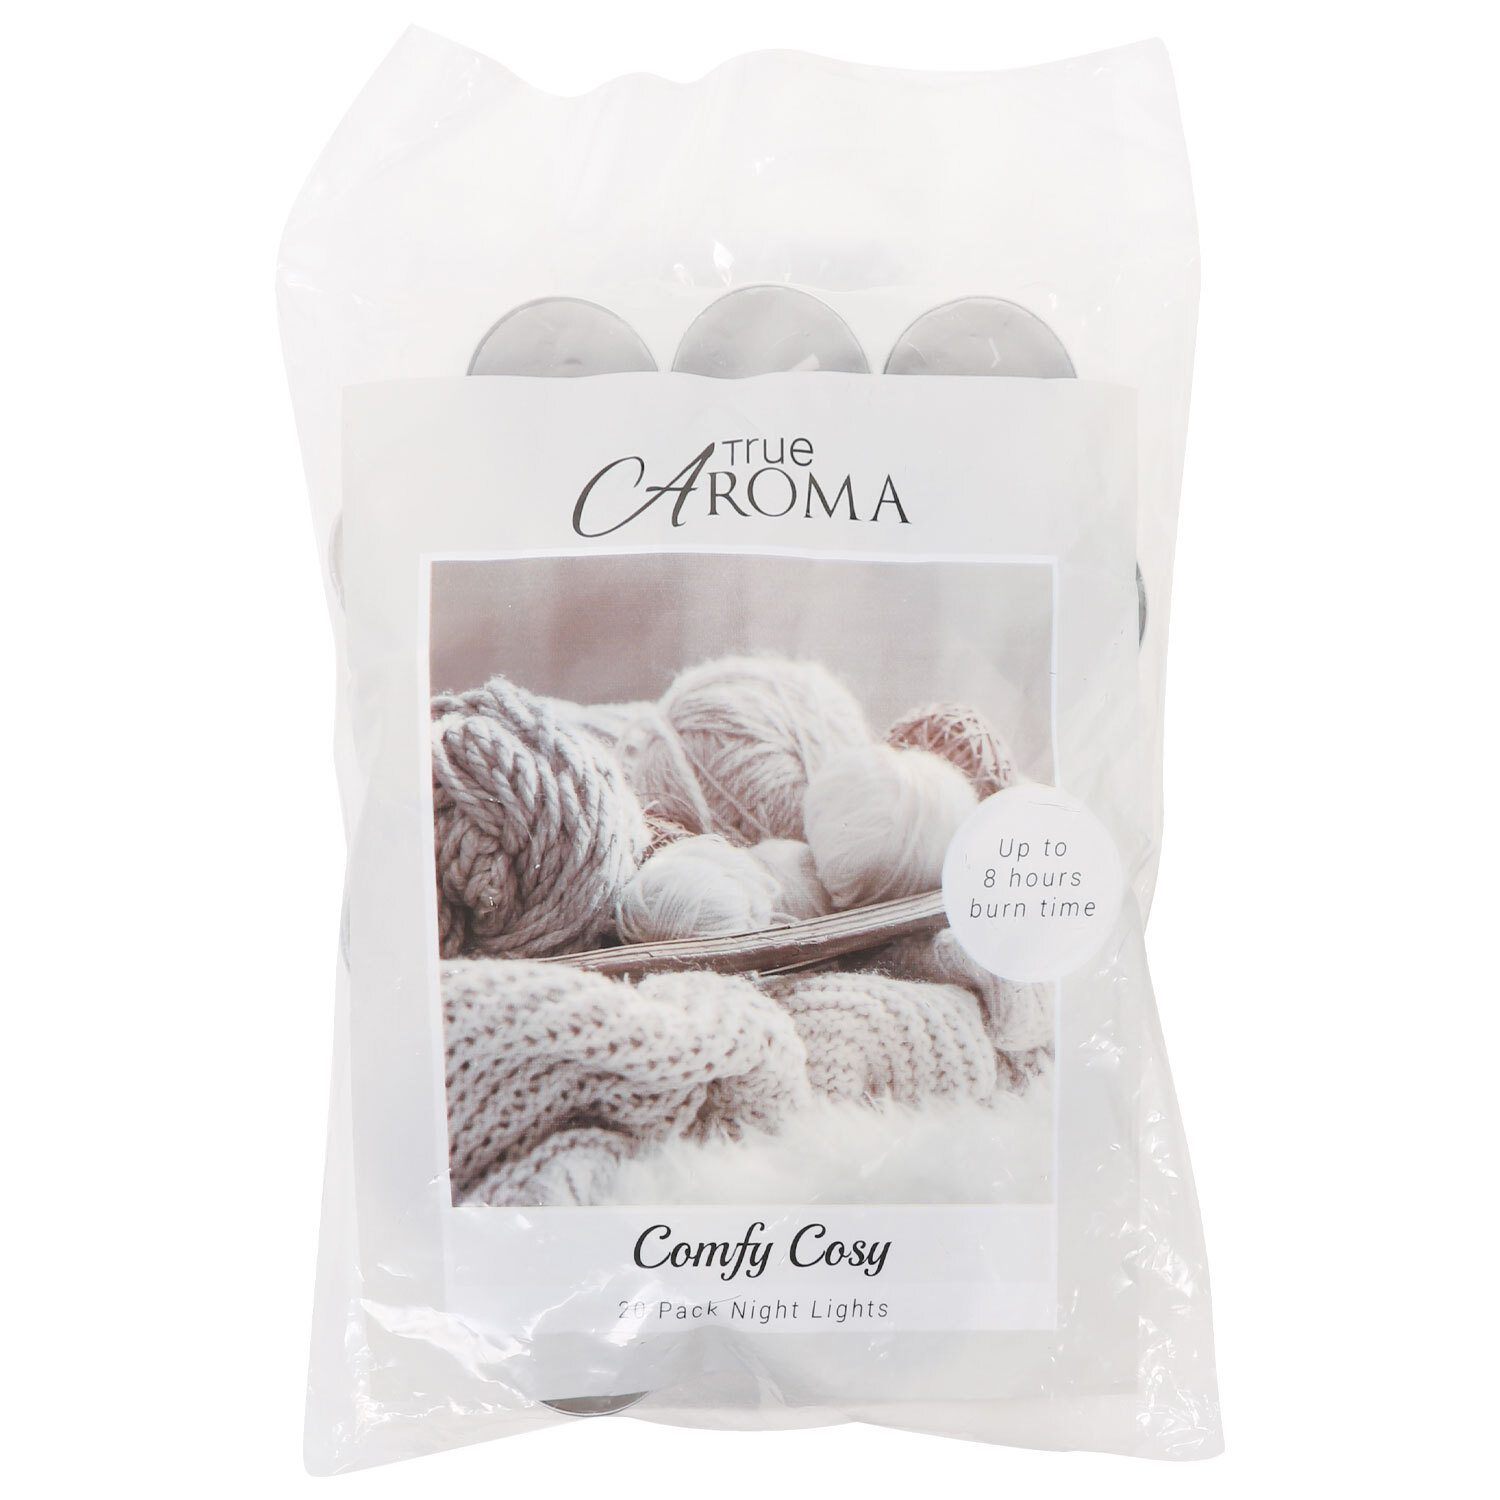 True Aroma Comfy Cosy Tealights 20 Pack Image